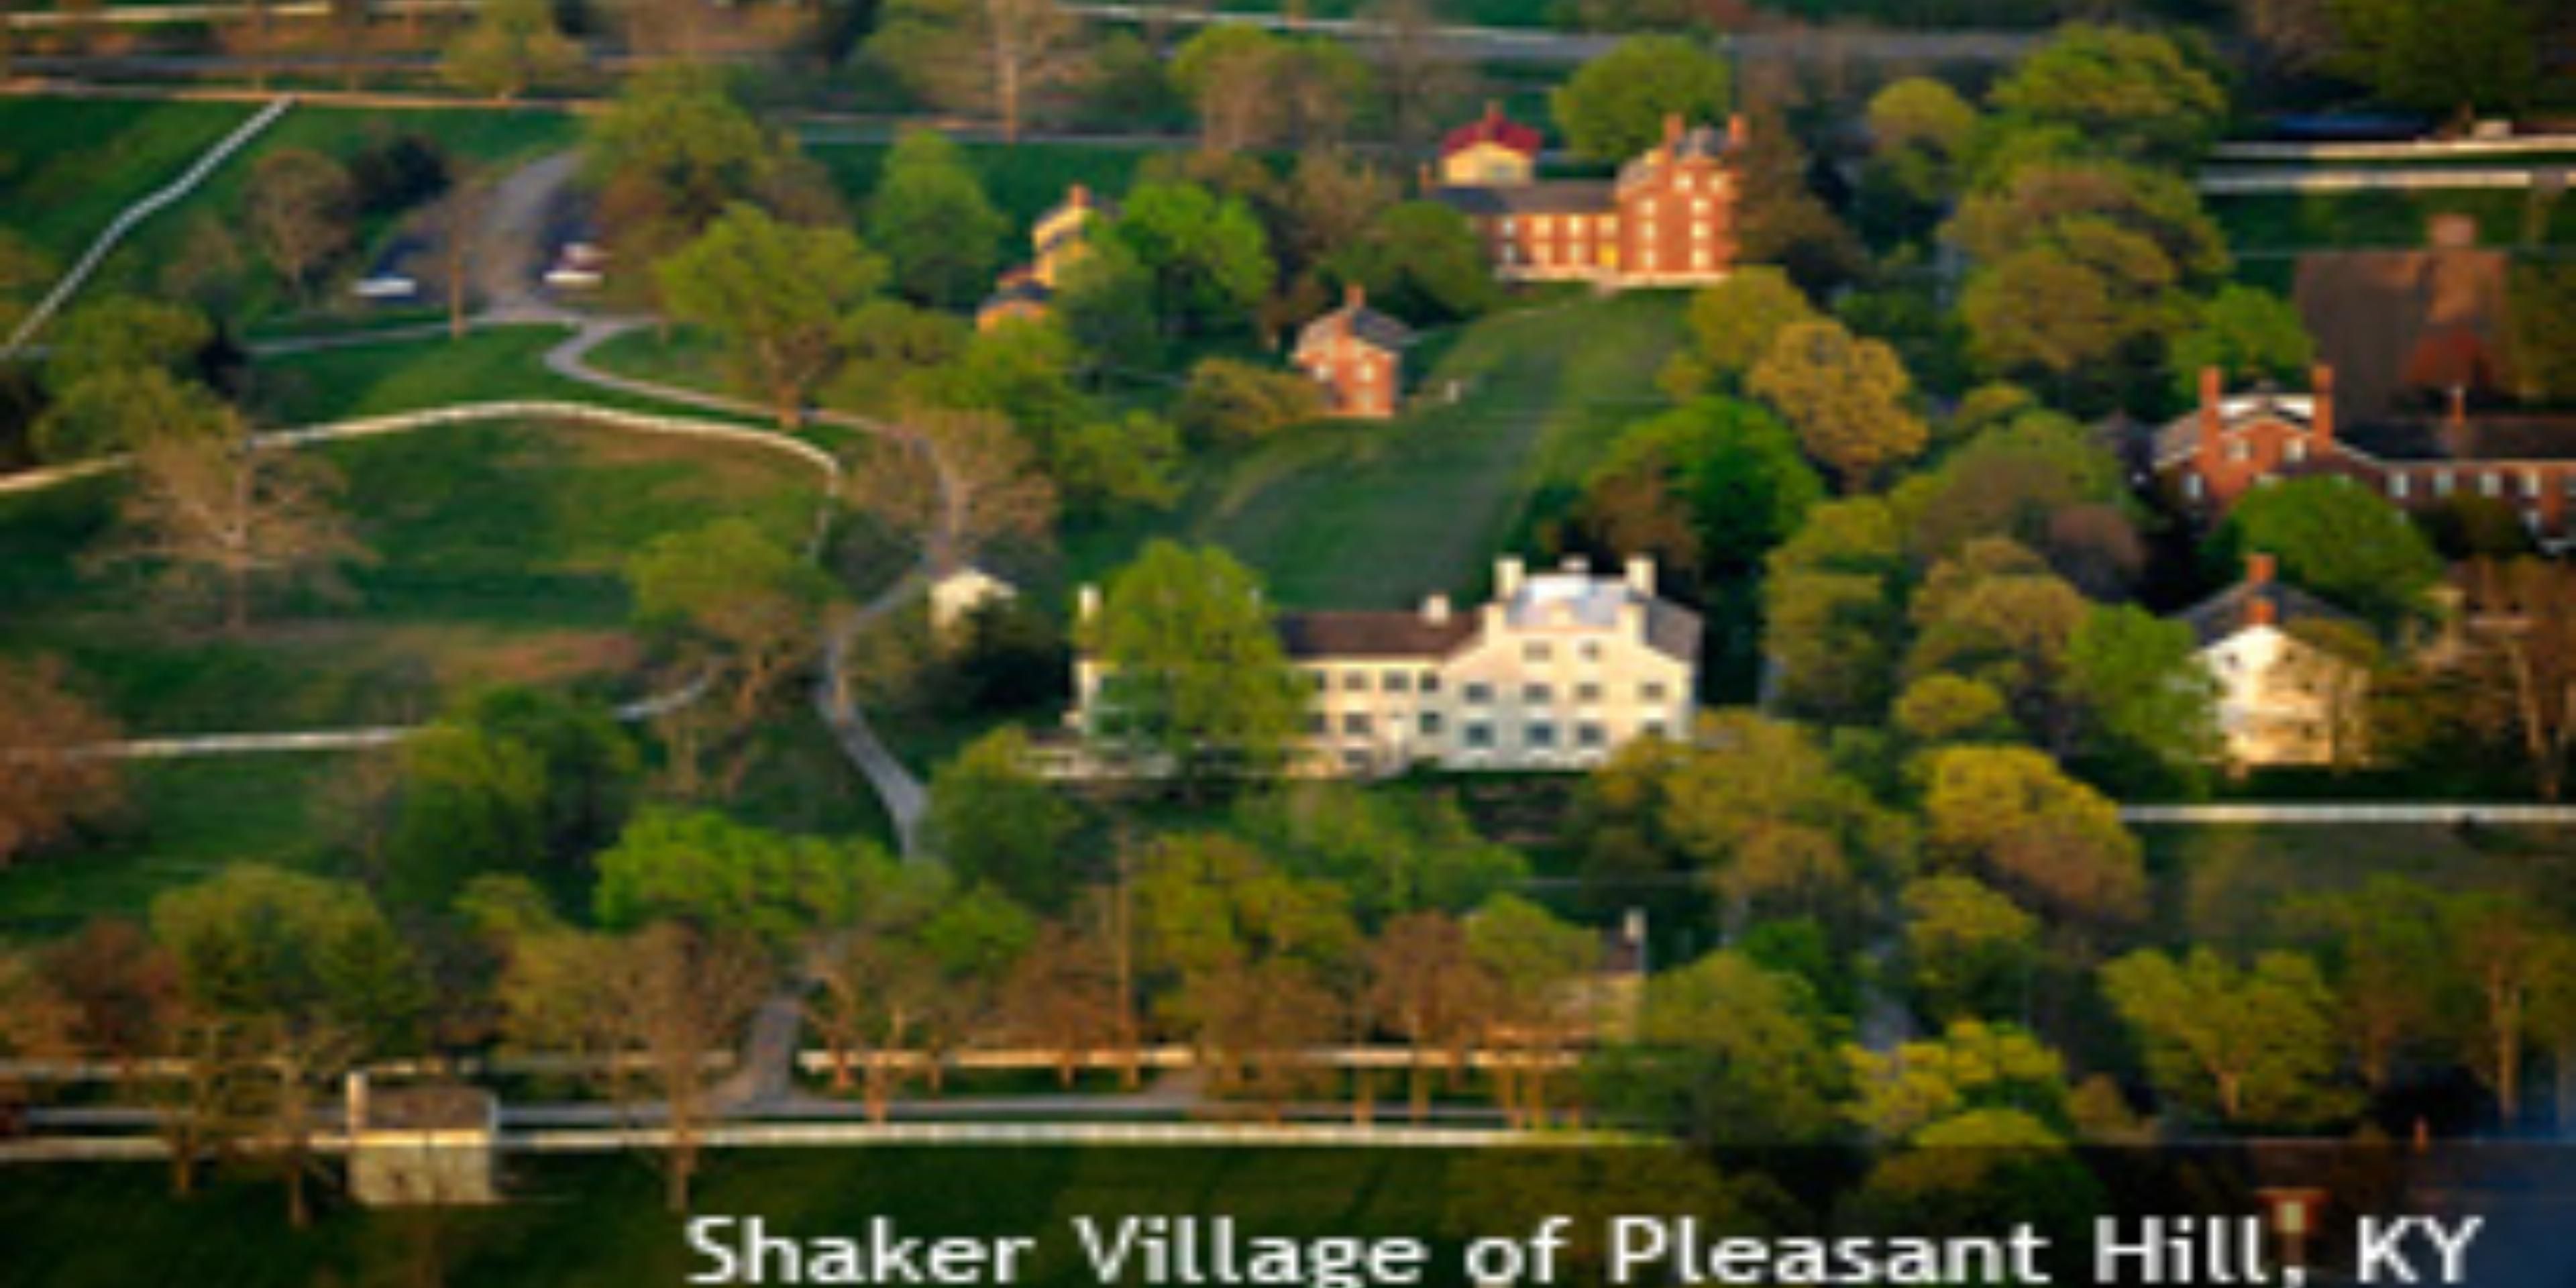 Shaker Village of Pleasant Hill is a landmark destination that shares 3,000 acres of discovery in the spirit of the Kentucky Shakers. Home to the third largest Shaker community in the United States between 1805 and 1910. Shaker farms were hubs of agricultural ingenuity, The Historic Centre, The Farm and The Preserve are centers of exploration.